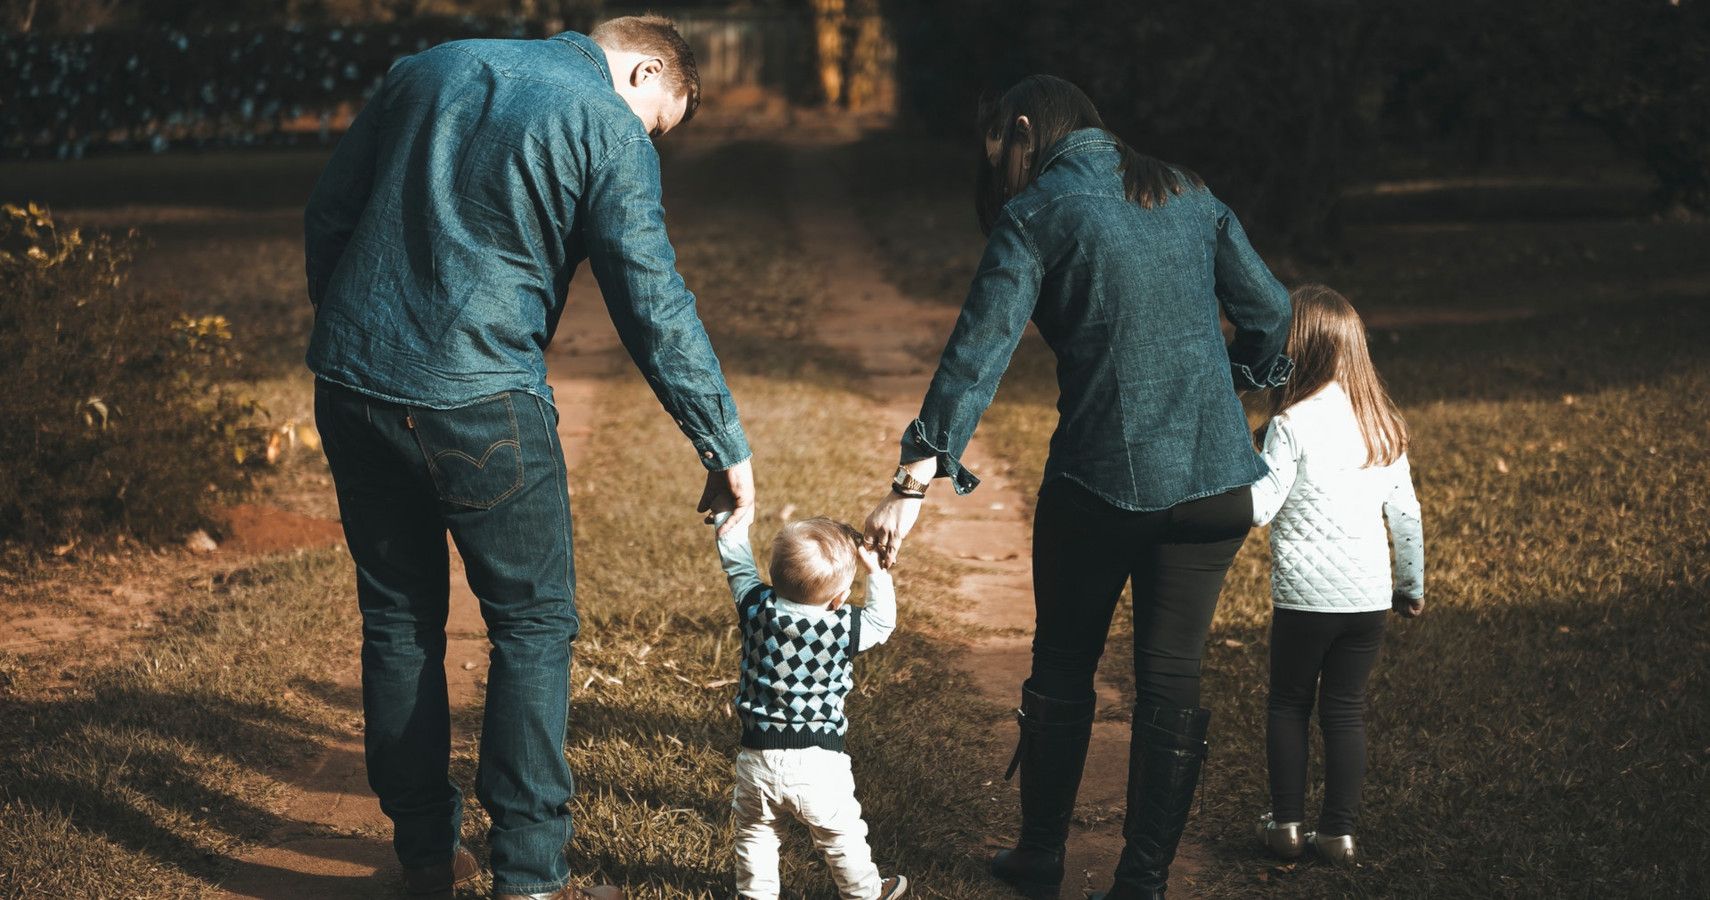 Parents walking together with their two children.